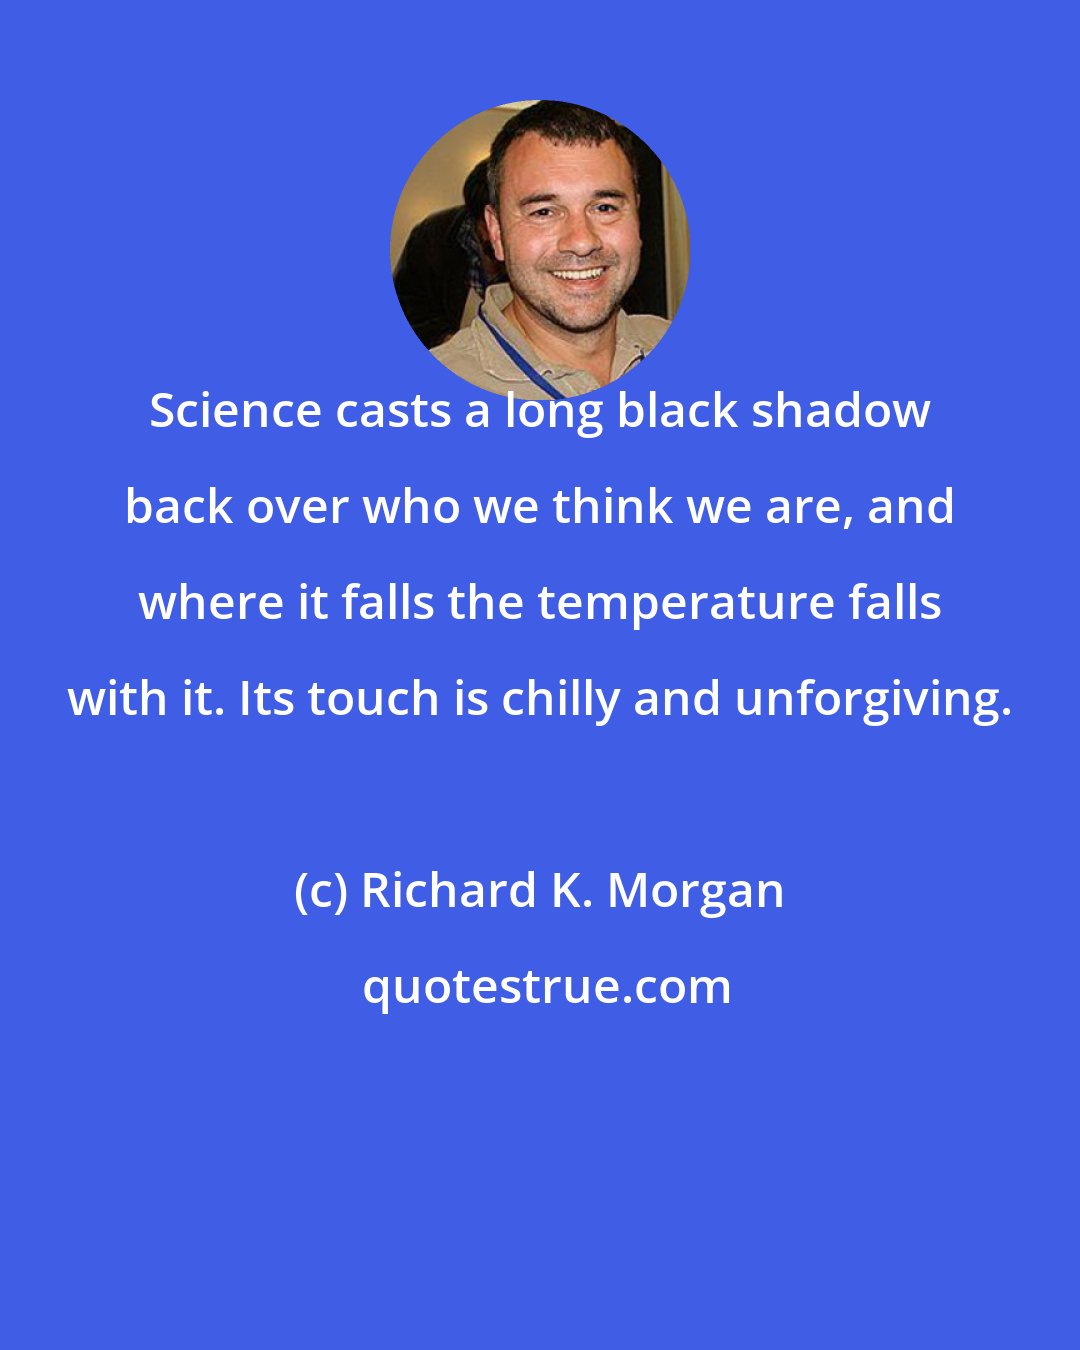 Richard K. Morgan: Science casts a long black shadow back over who we think we are, and where it falls the temperature falls with it. Its touch is chilly and unforgiving.